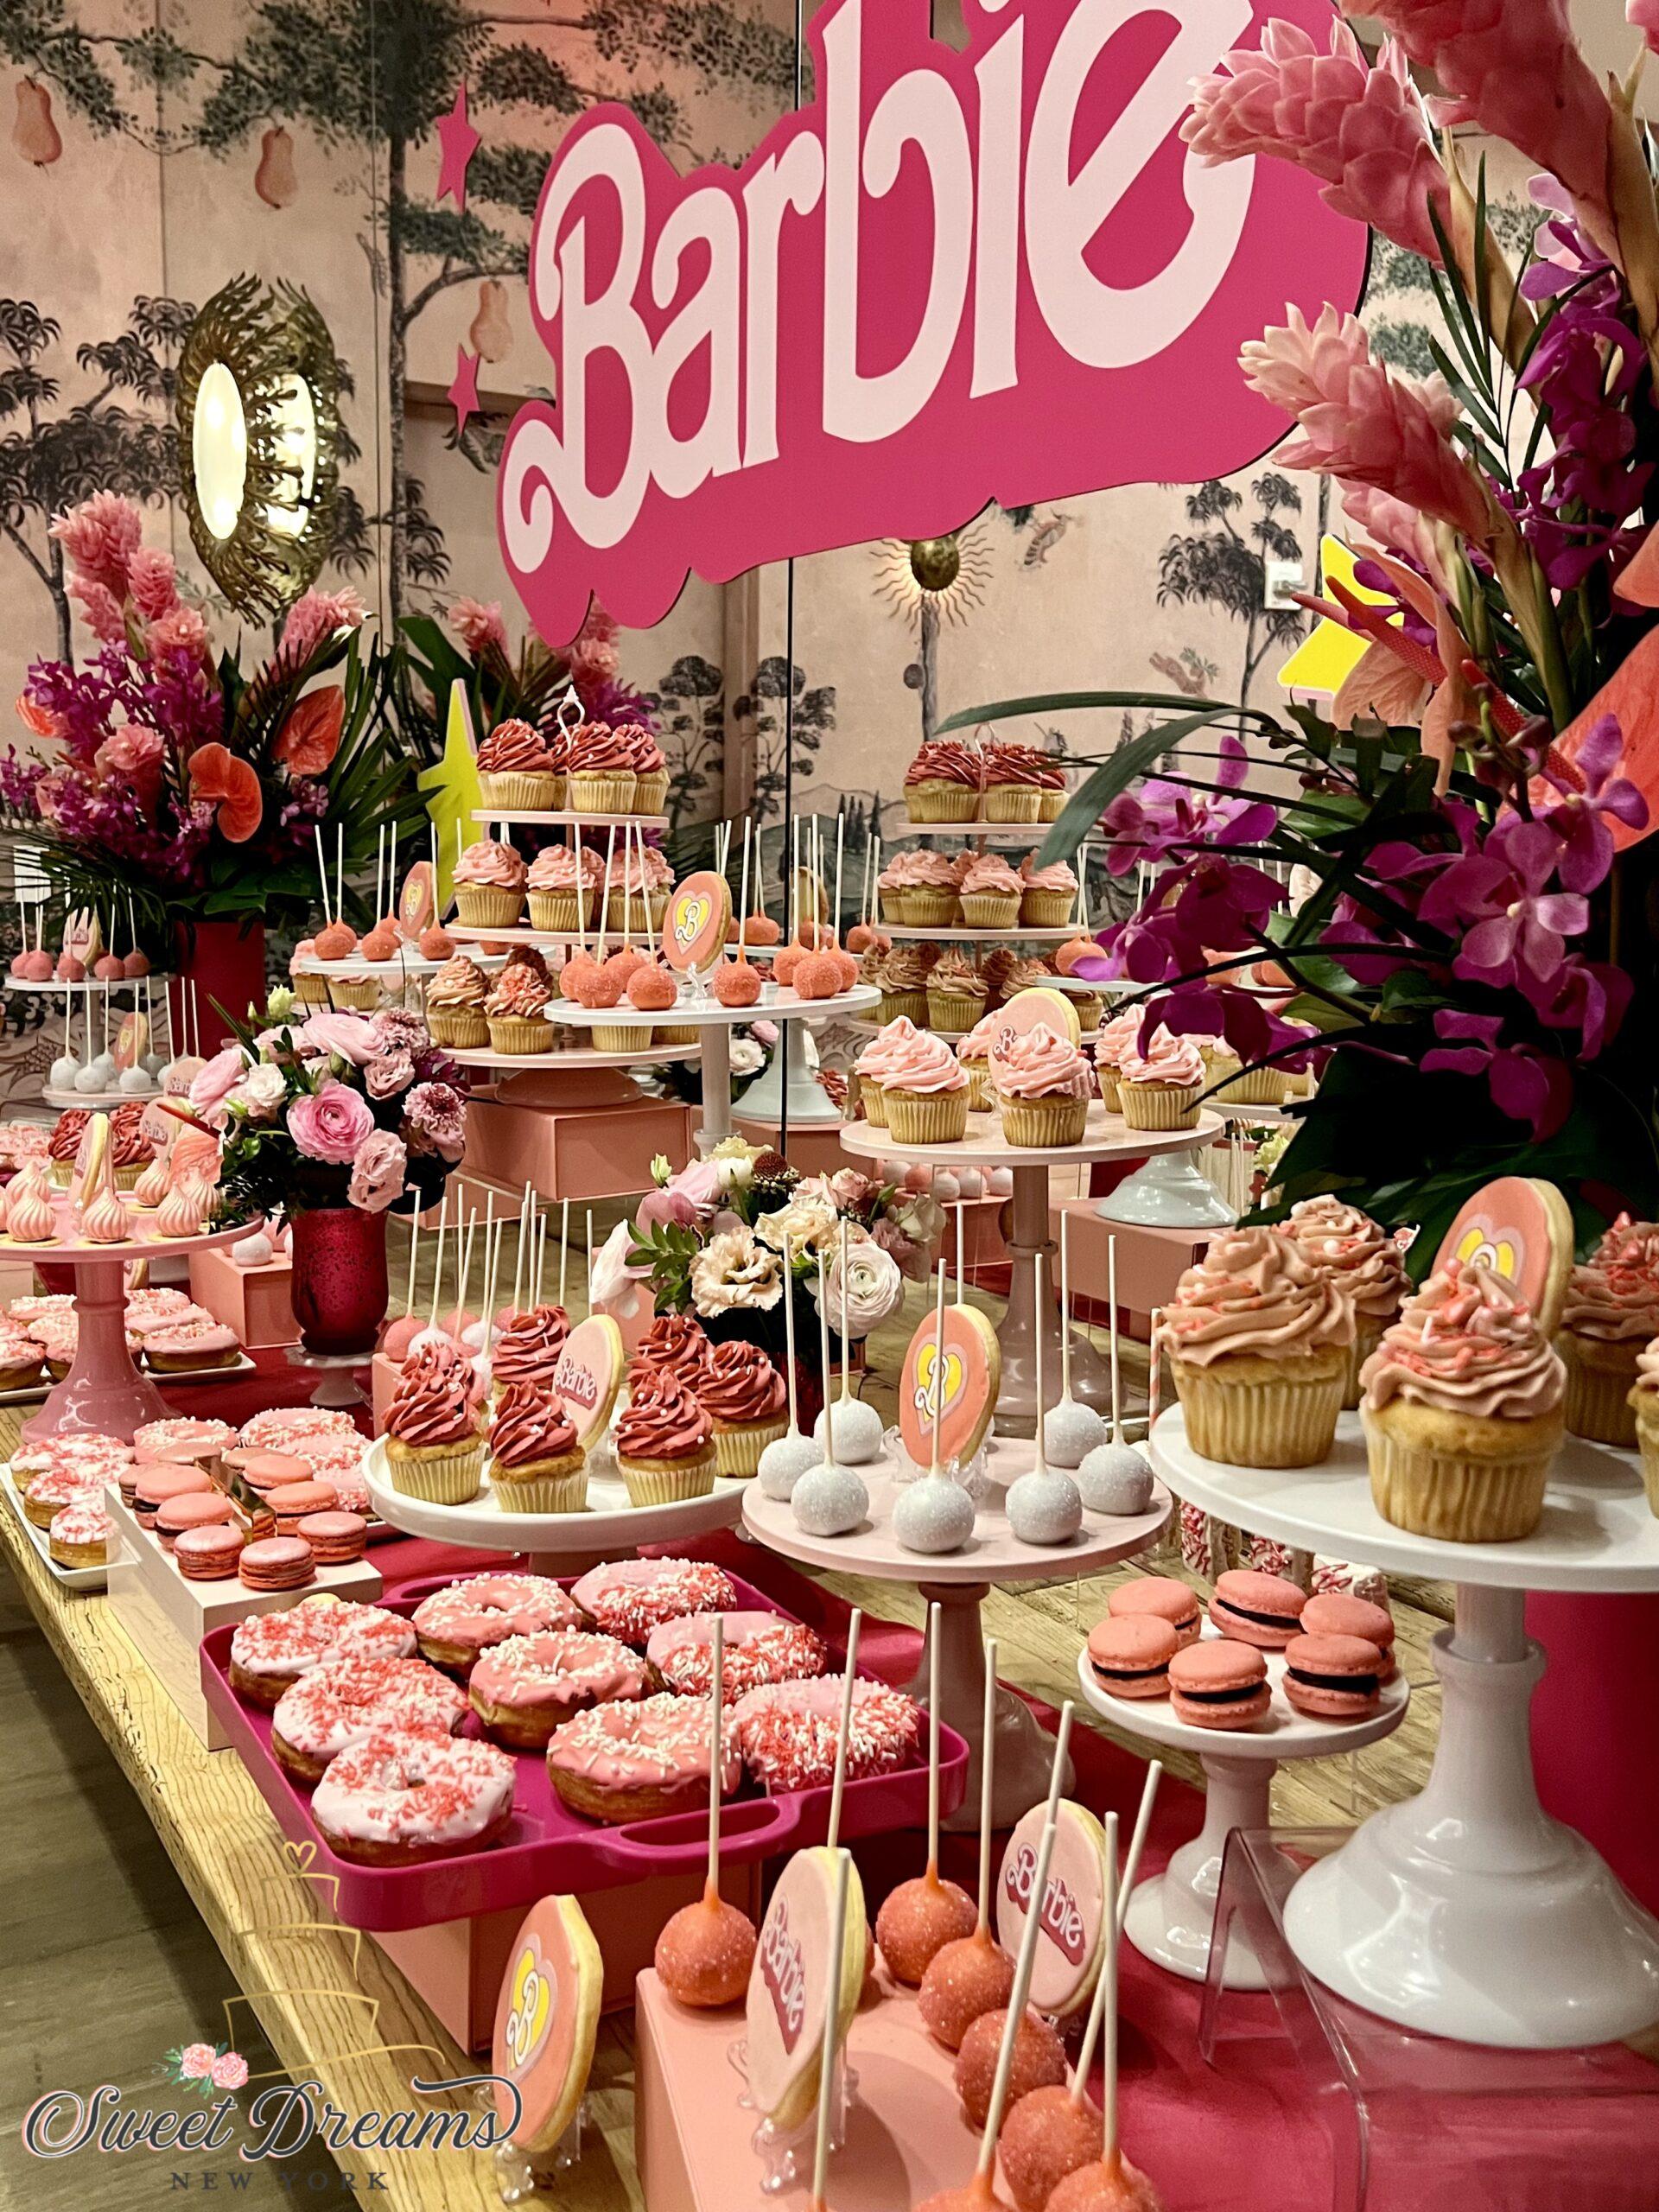 Barbie NYC Dessert Table Long Island Pink Cupcakes donuts Barbie Themed birthday Bridal Shower pink Desserts